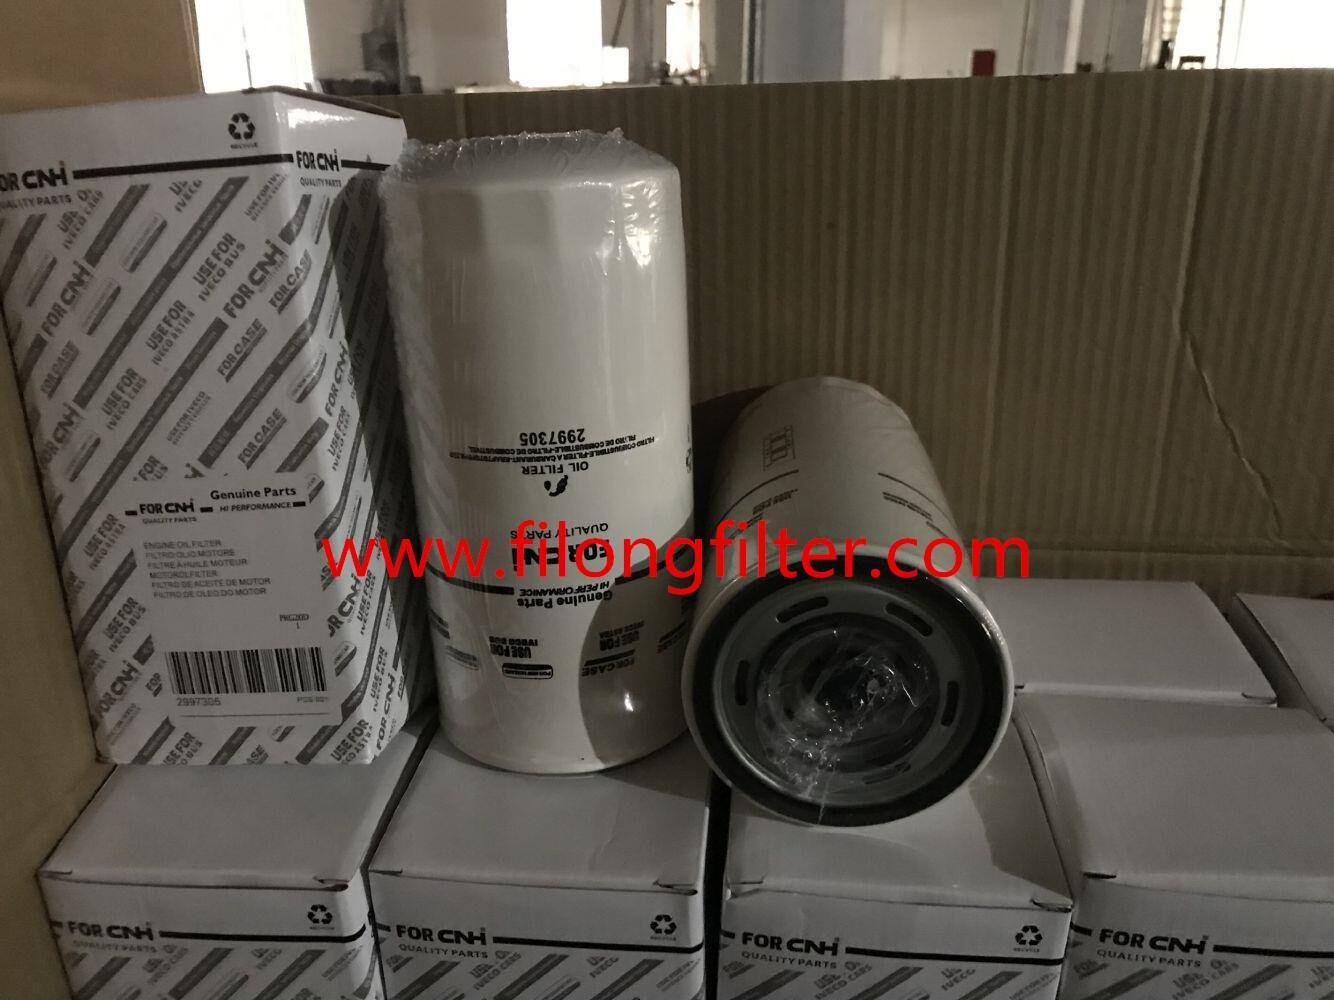 FILONG Manufactory For CNH New HOLLAND & IVECO Oil filter 	1907581, 2997305, 98432653, 1902102, 1907584, 4787733, 1903629, 1930542, 61315398, 1903715, 1930906, 61315399 4787733,1931048,1930542,1930906  WP1169,LF3594 OP592/1 	PH5103 H220WN  SK814